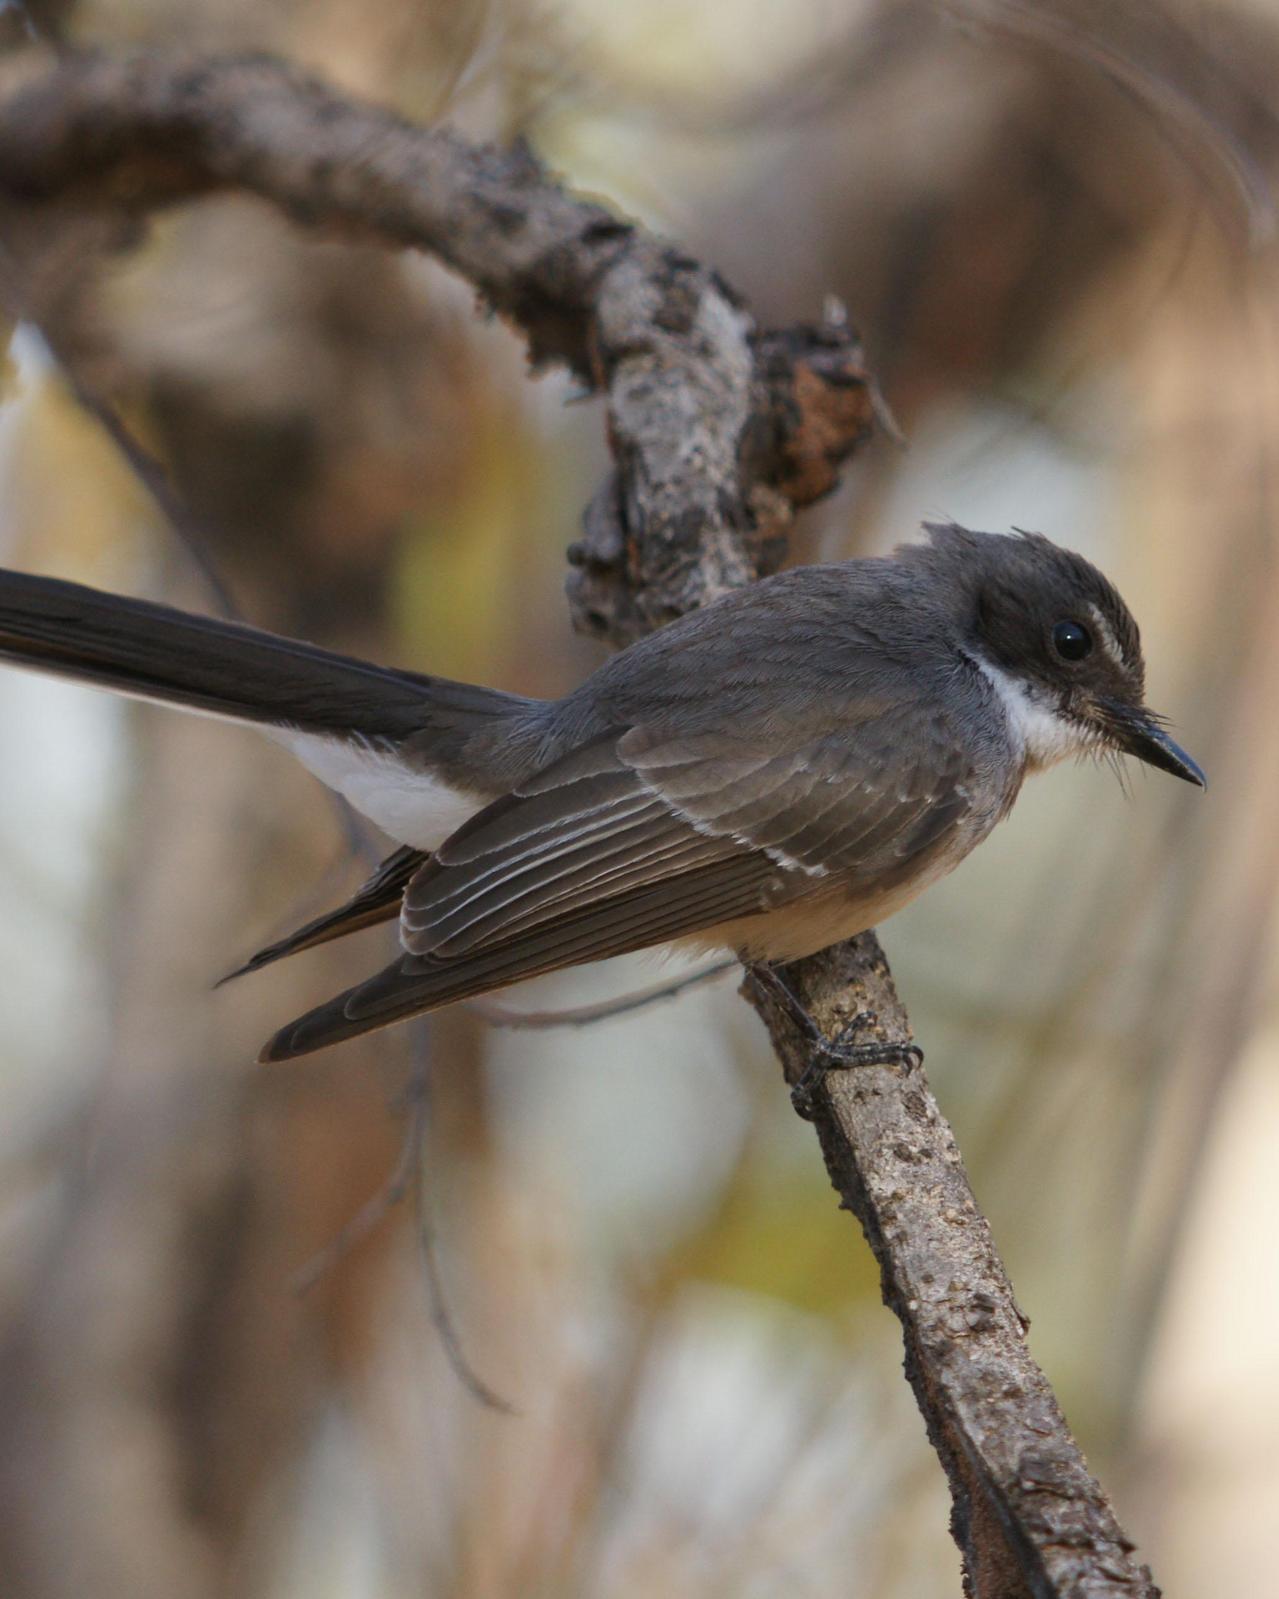 Northern Fantail Photo by Steve Percival